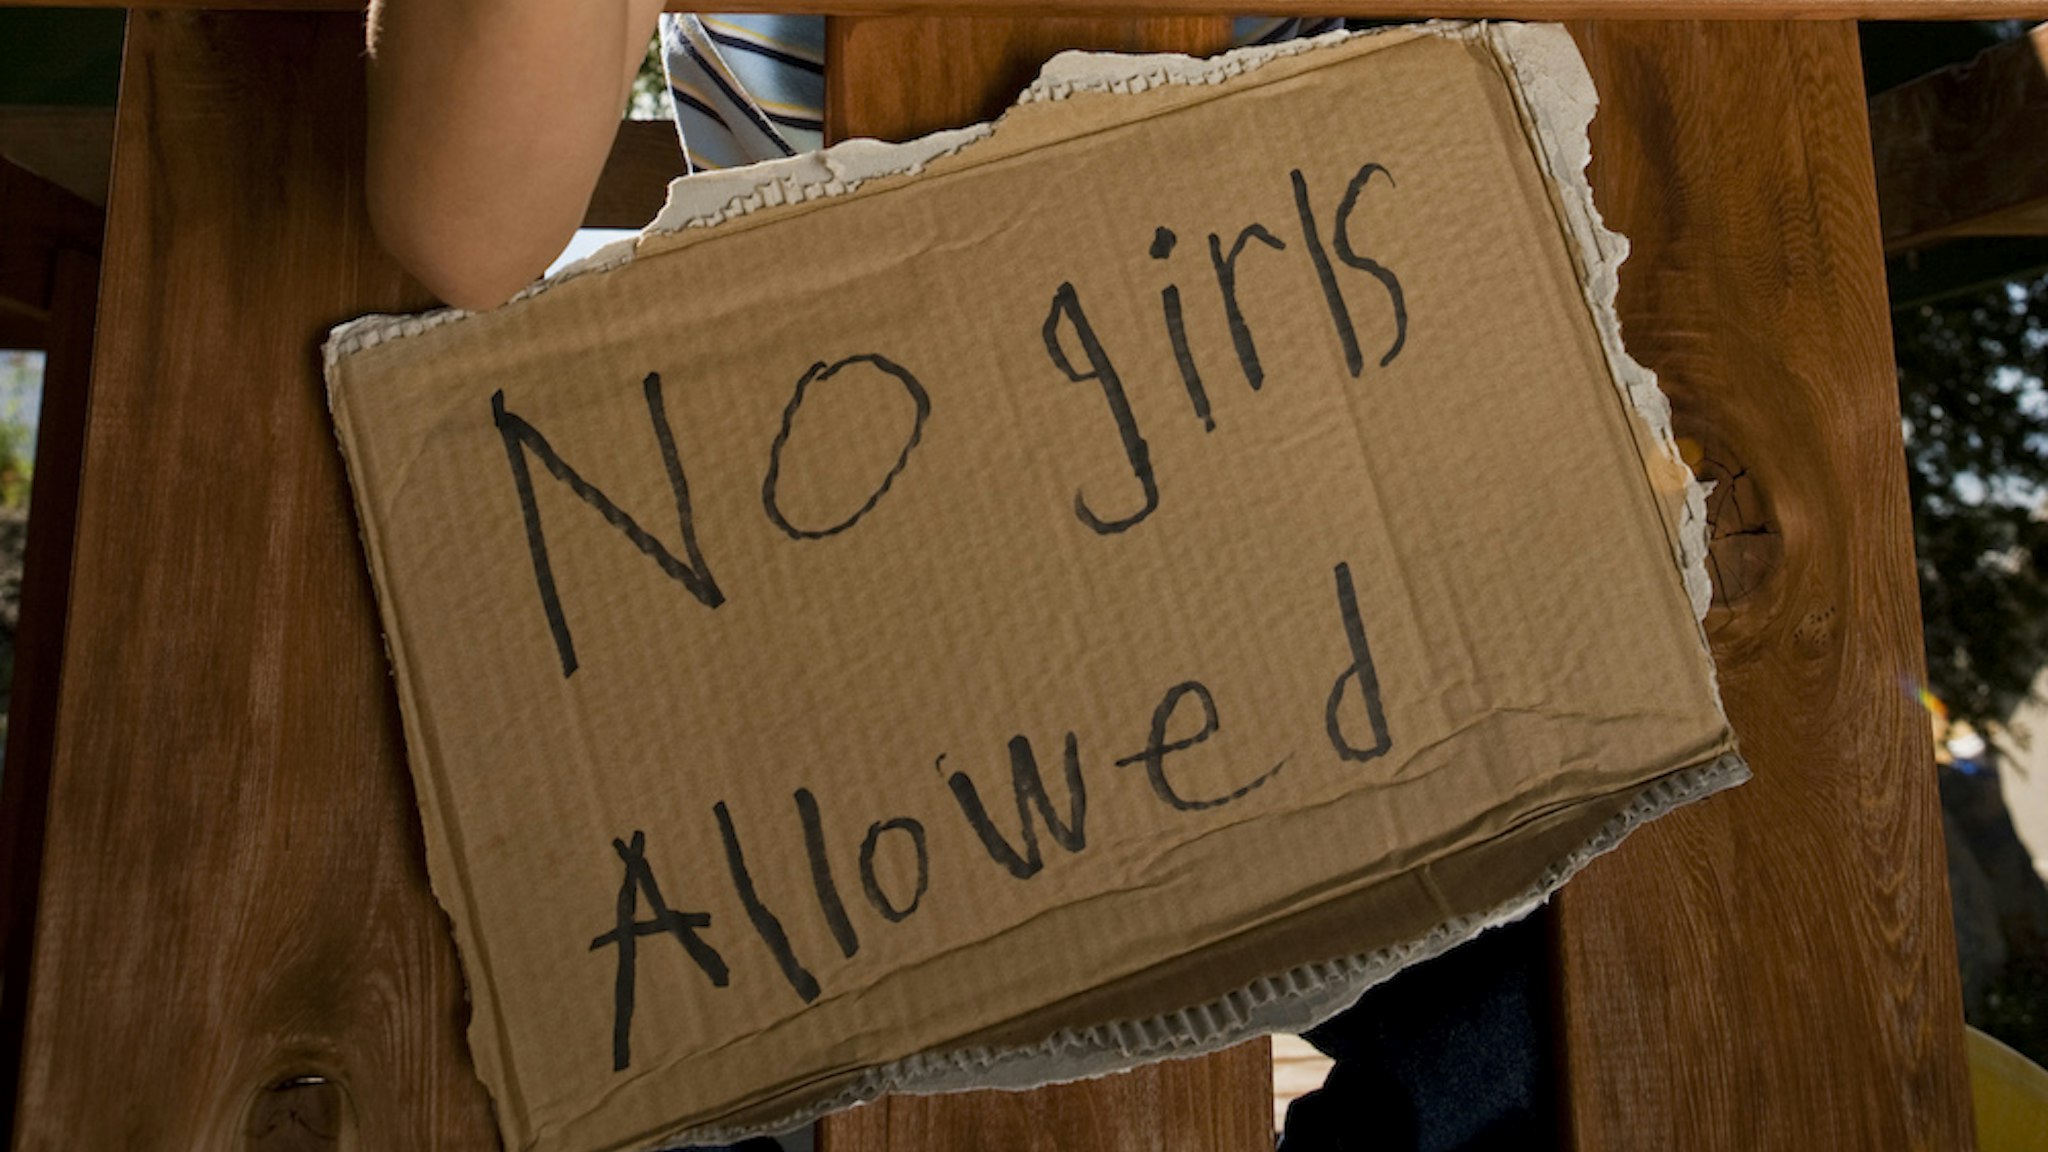 Boys with no girls allowed sign